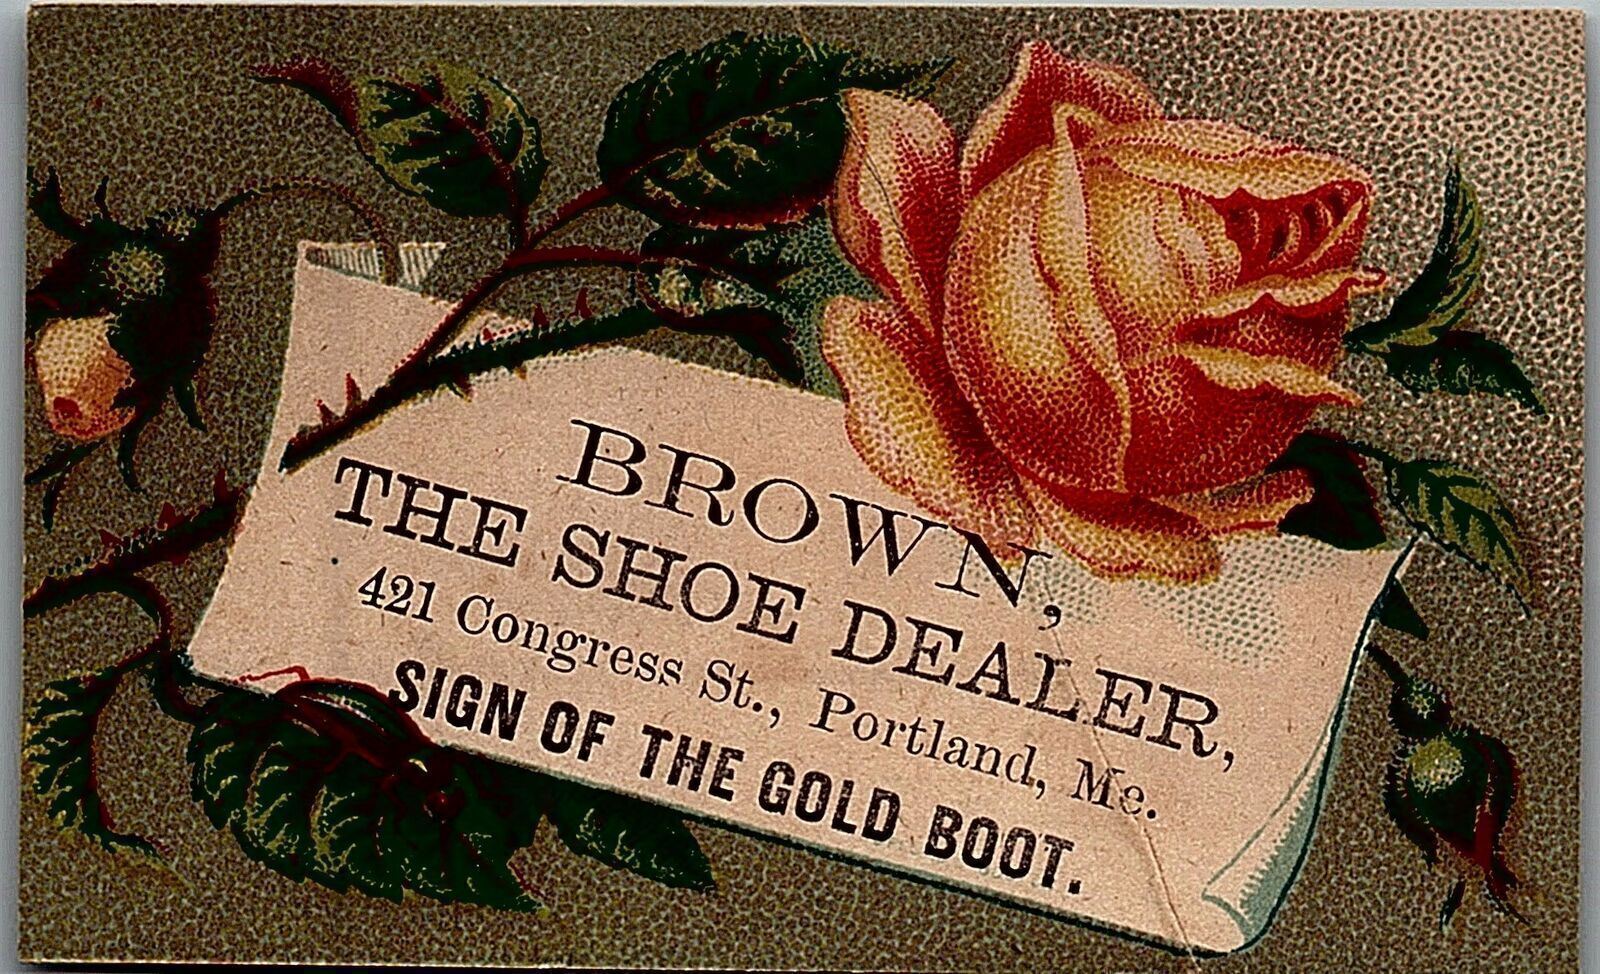 1880s PORTLAND ME BROWN-THE SHOE DEALER SIGN OF THE GOLD BOOT TRADE CARD 26-71